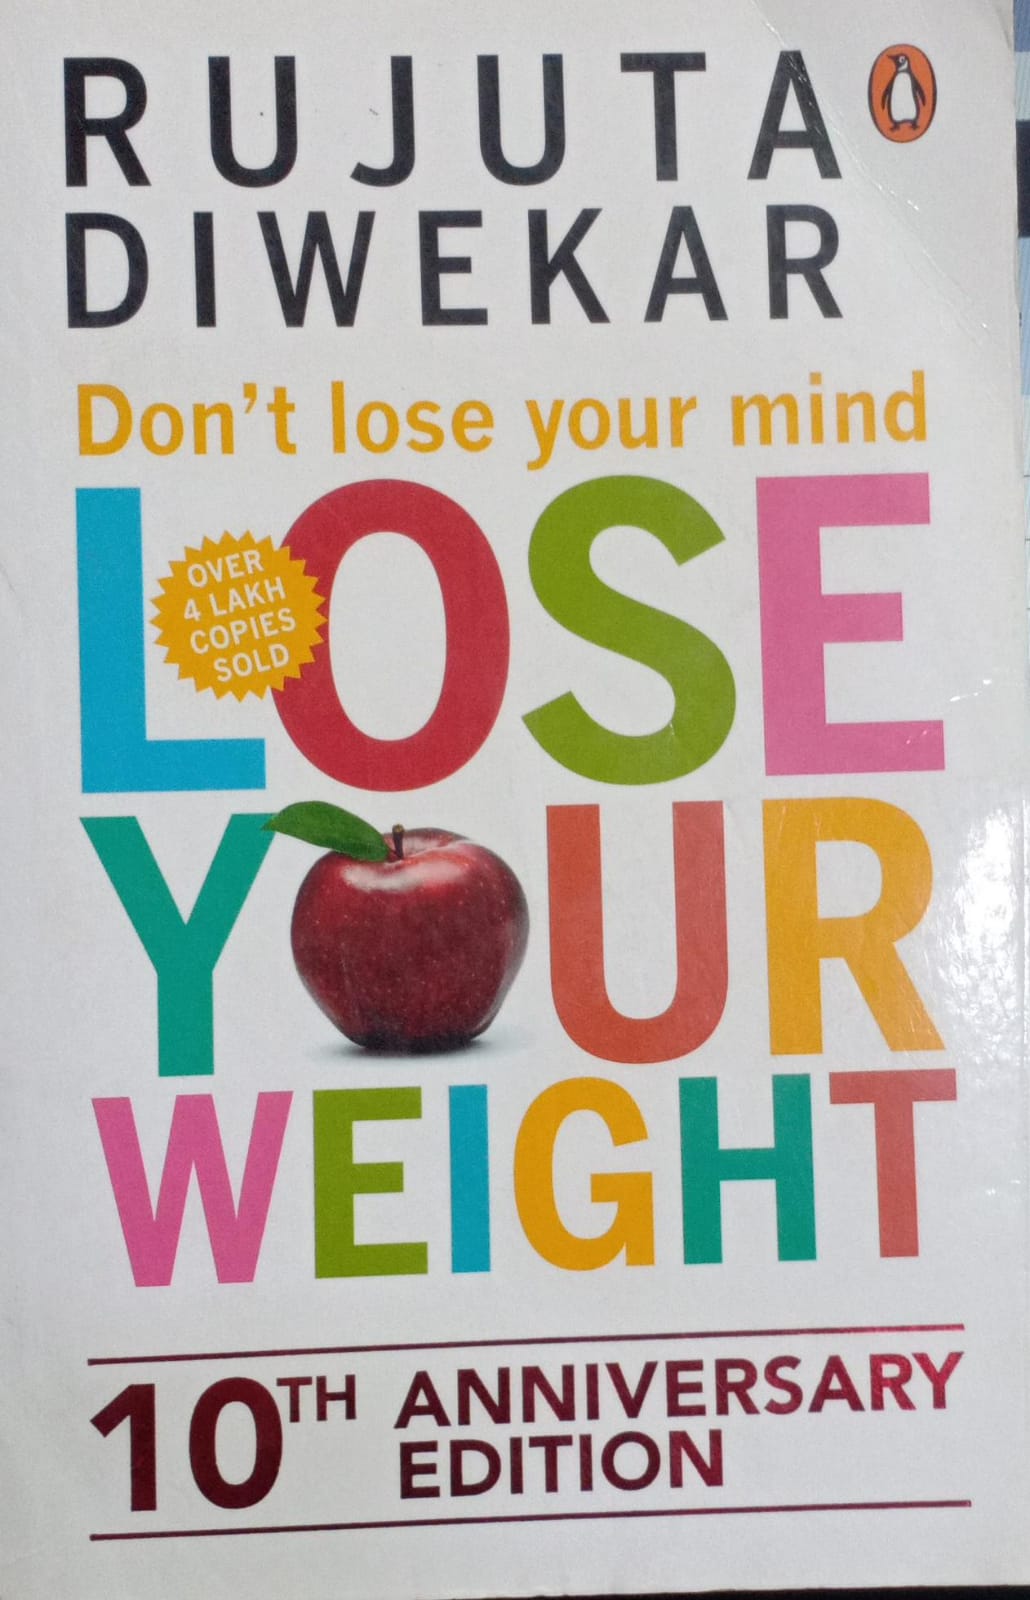 Don't lose your mind, lose your weight